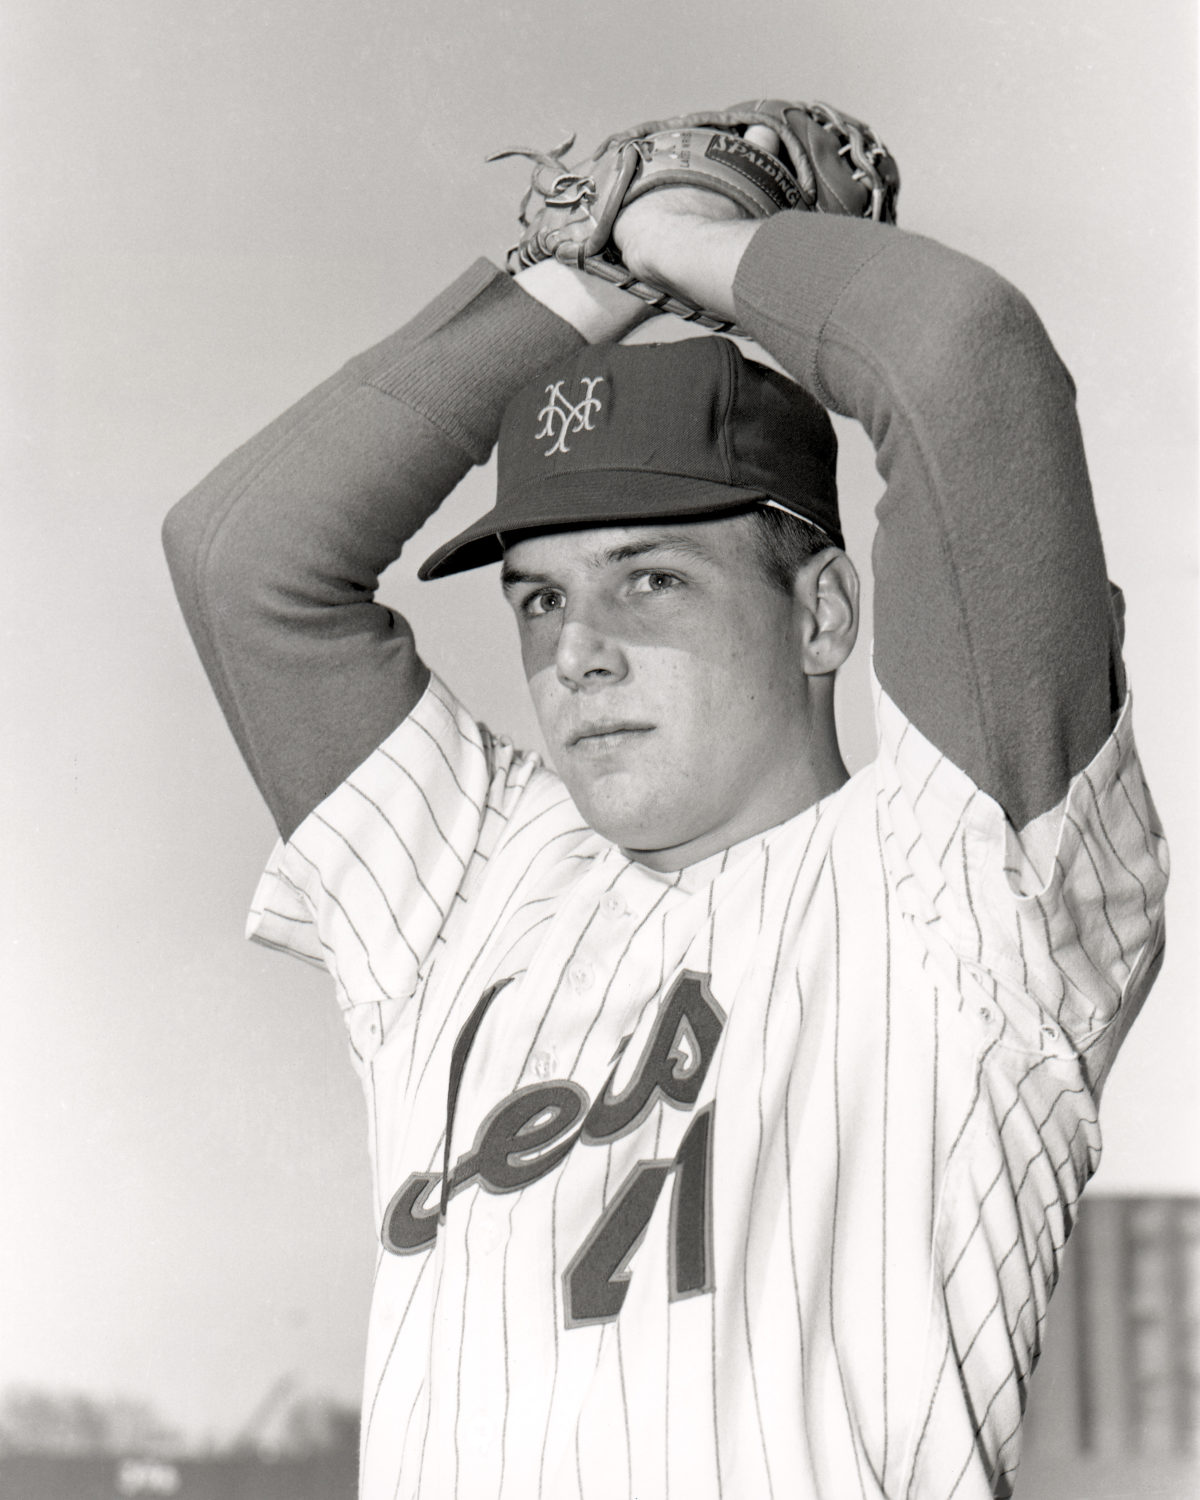 A Young Tom Seaver Poses at the Start of 1967 Season